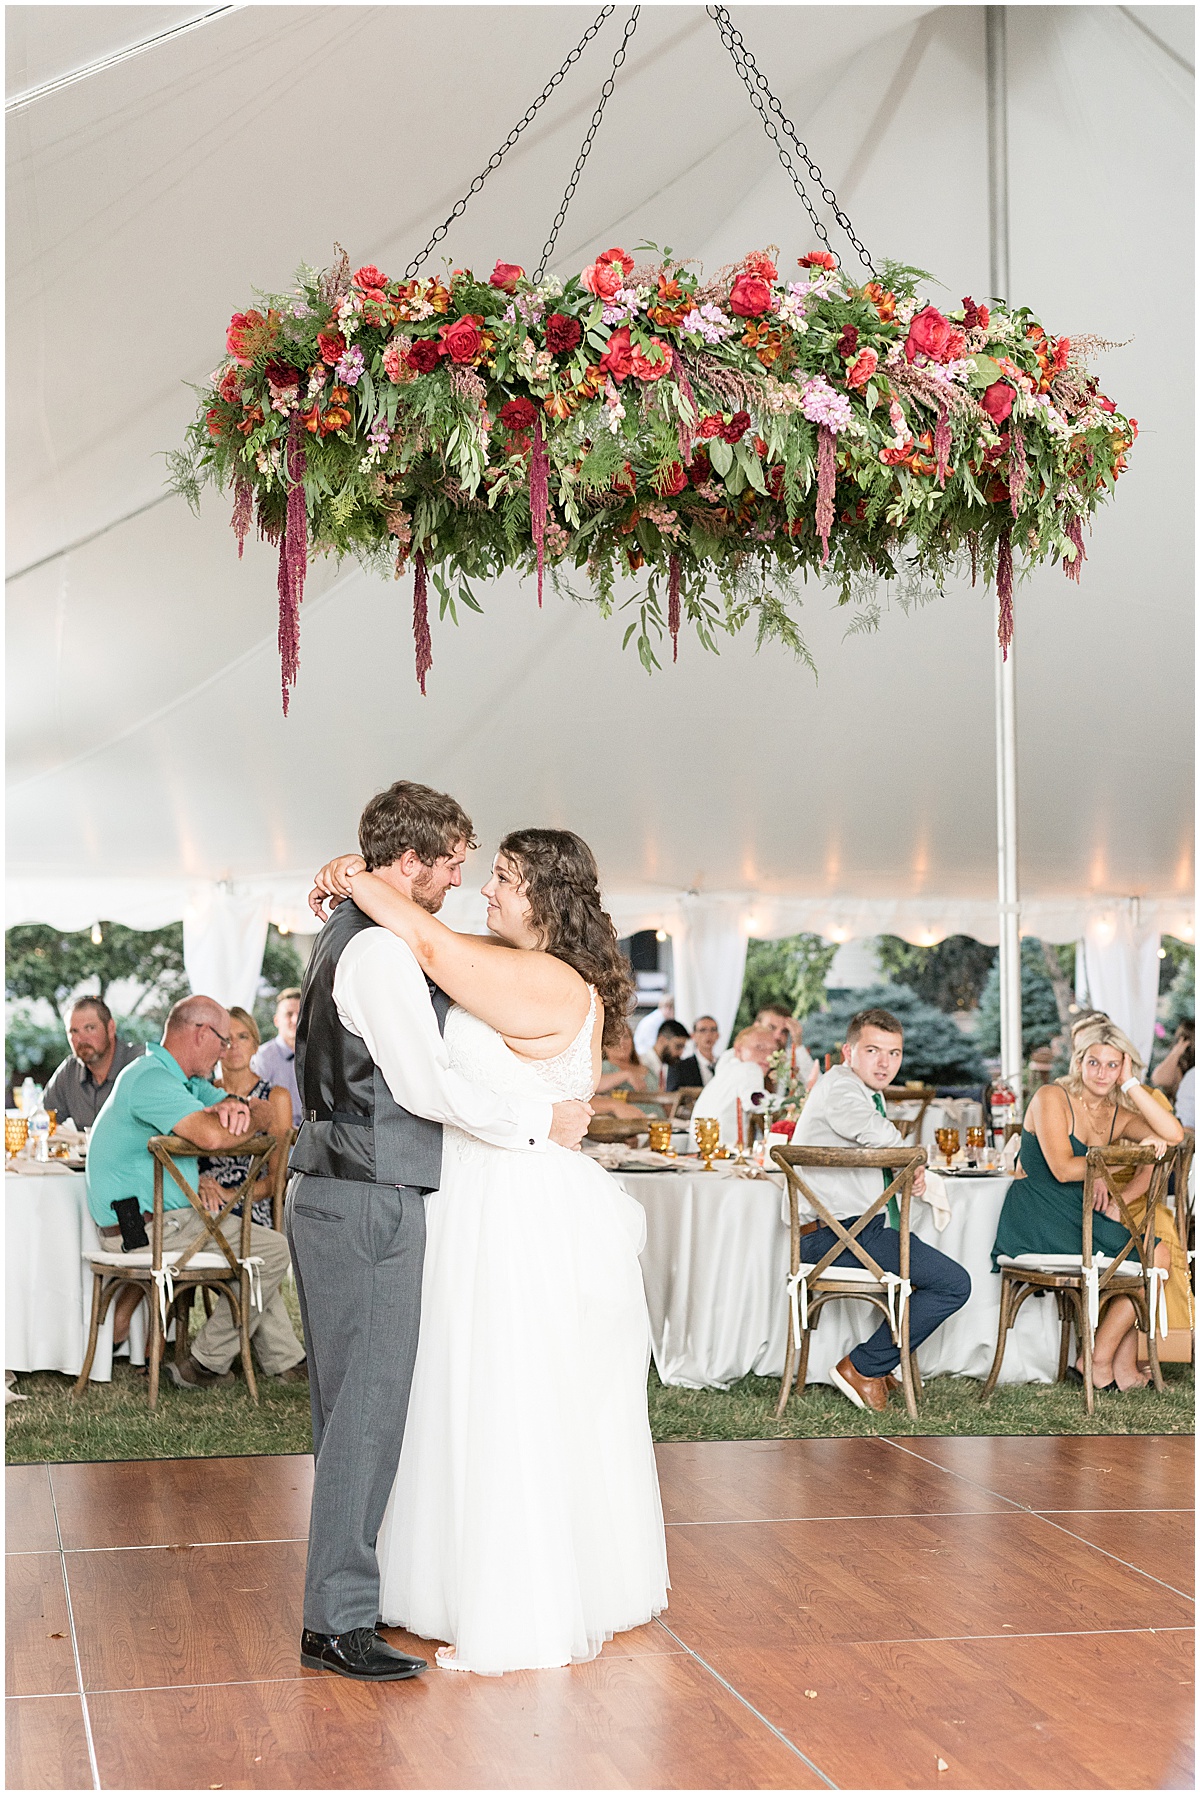 Dancing at outdoor private property wedding in Frankfort, Indiana by Victoria Rayburn Photography